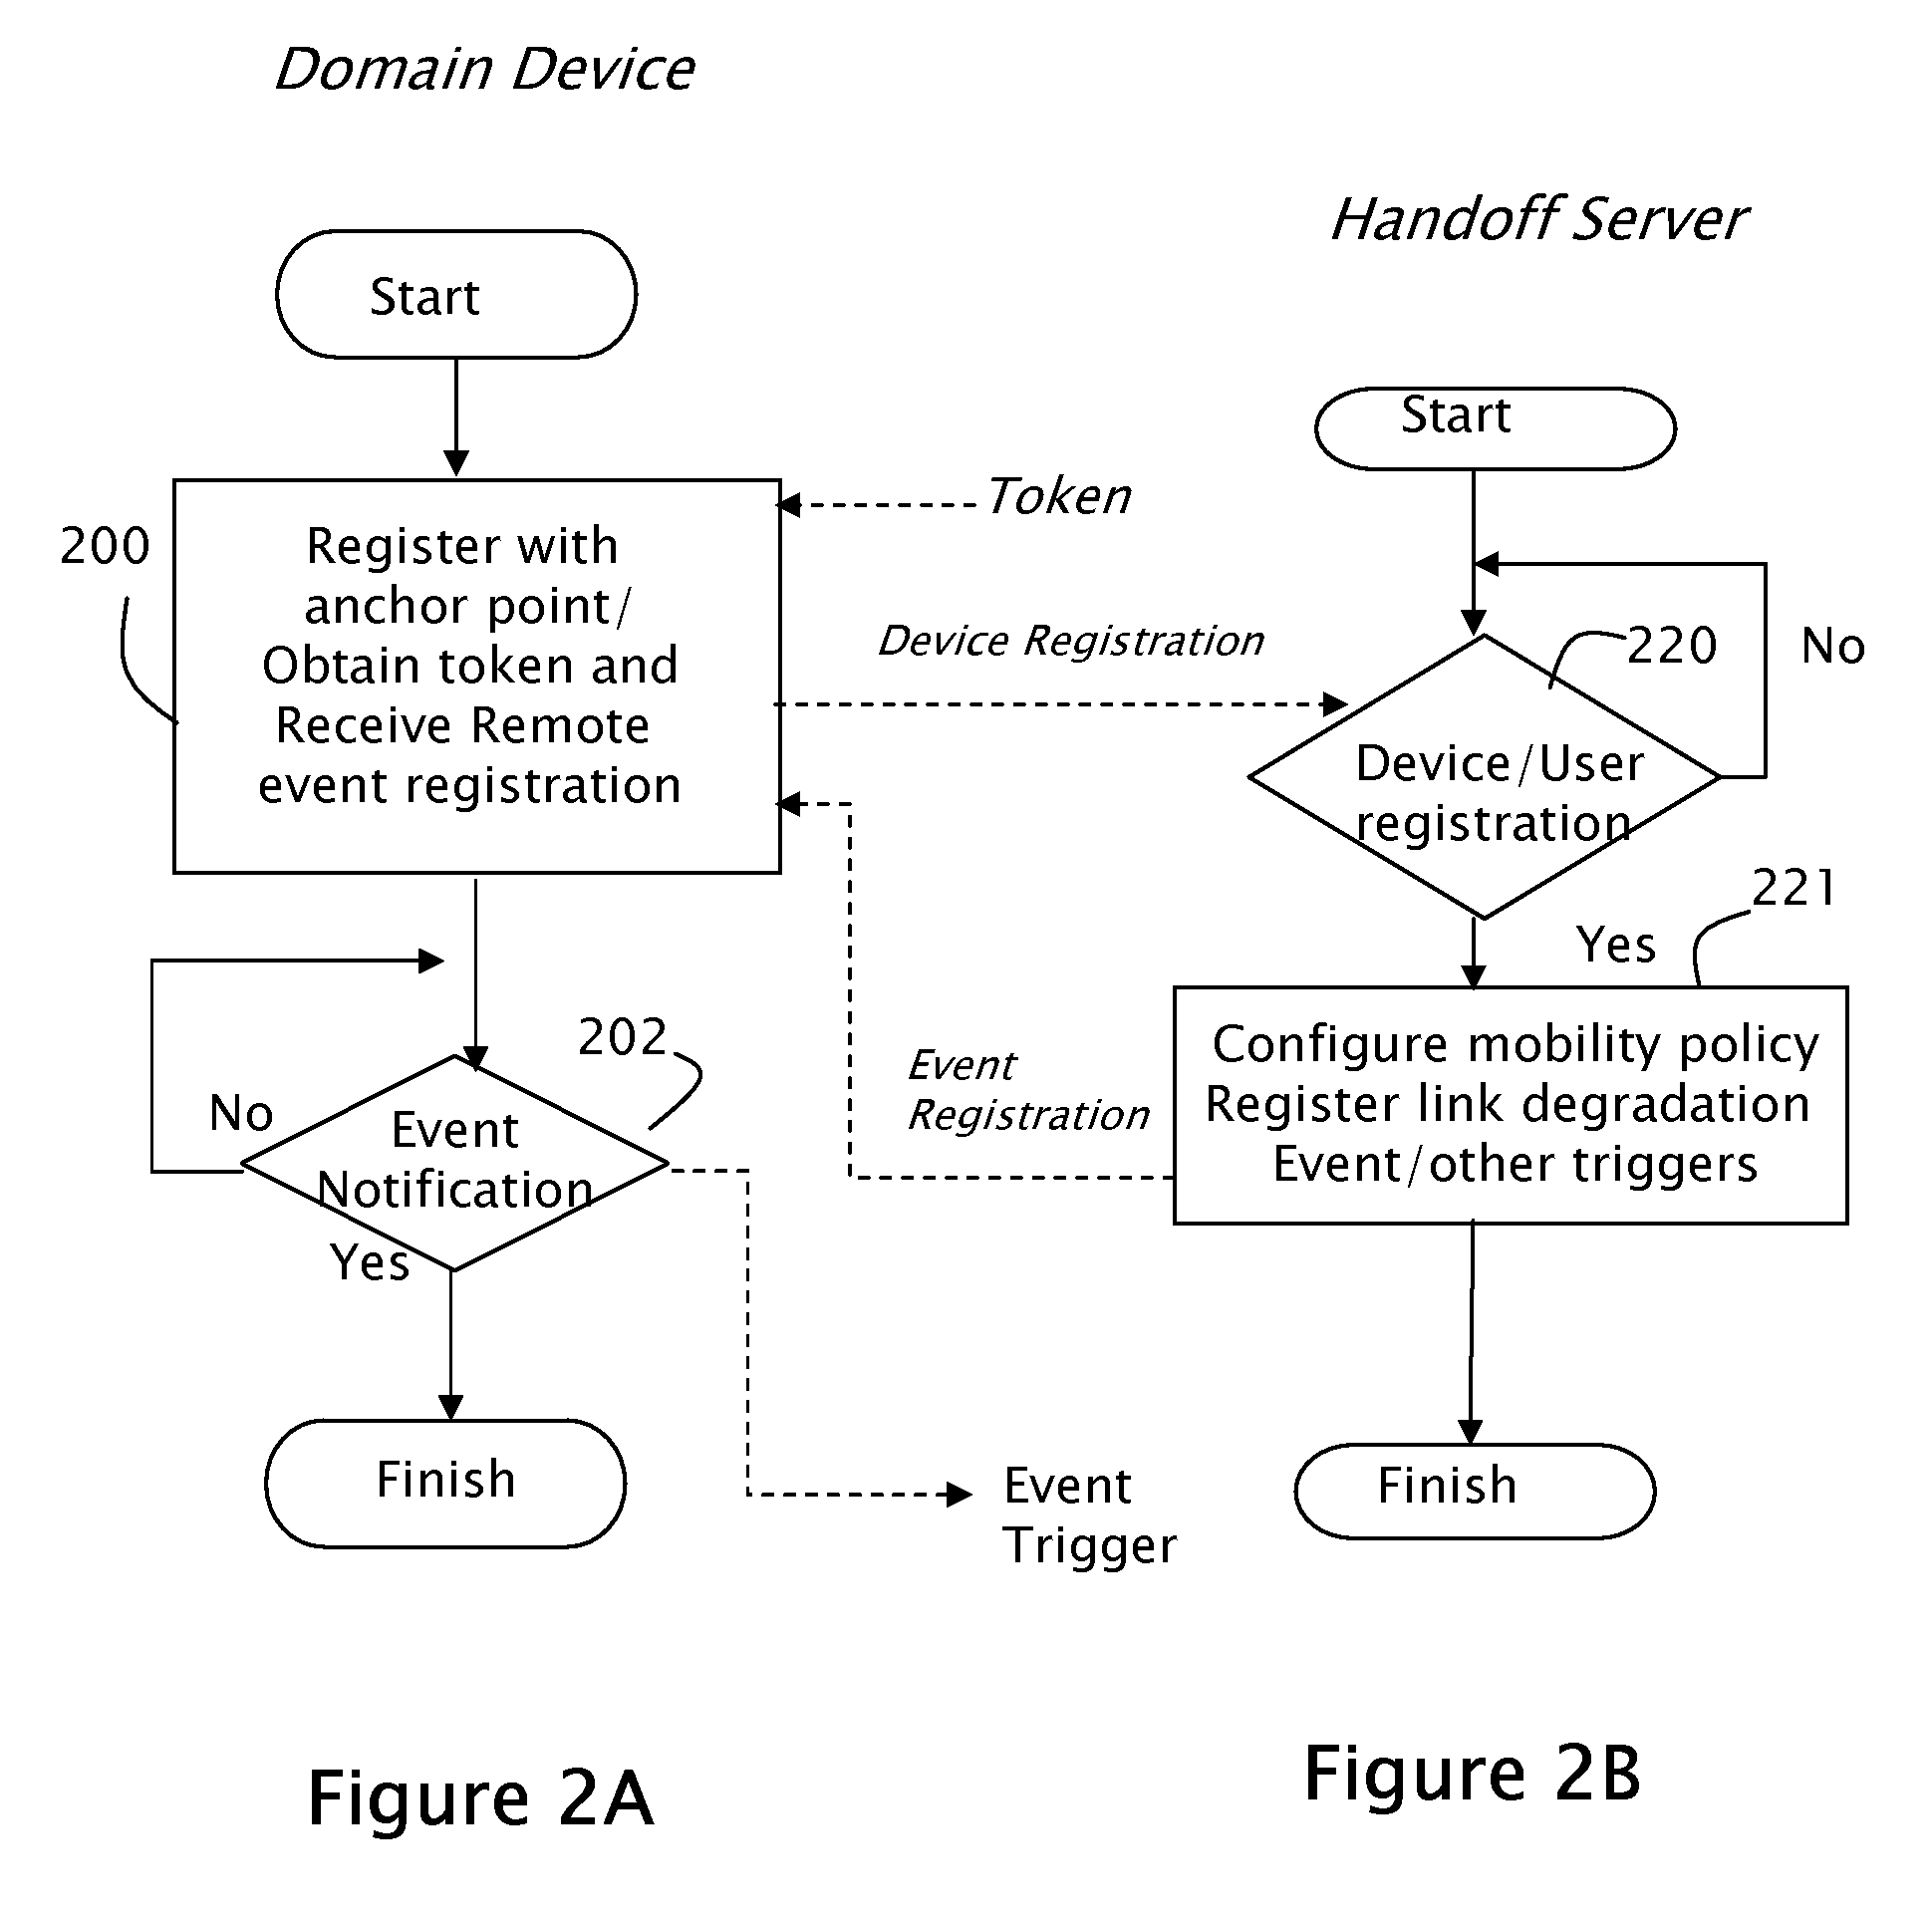 Method and apparatus for security configuration and verification of wireless devices in a fixed/mobile convergence environment